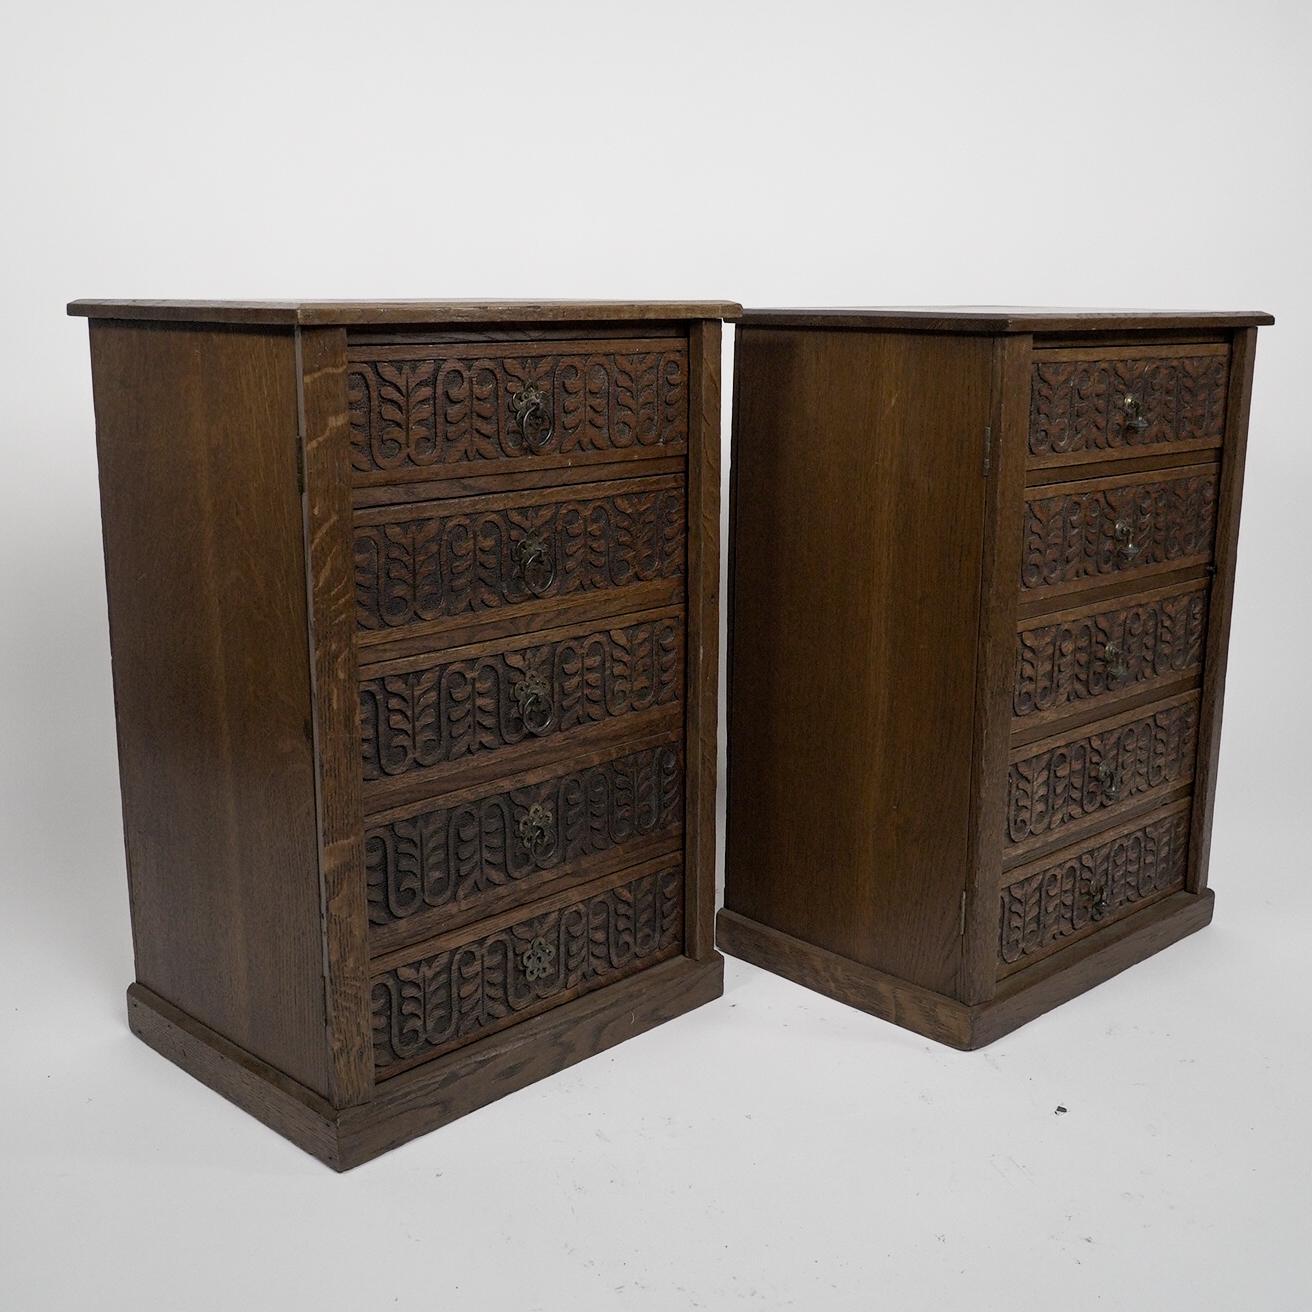 A pair of small Aesthetic Movement oak sets of drawers, with carved alternating fern leaf decoration to the drawer fronts and ring pull brass handles. The hinged sides with lockable side flaps. Price for the pair.